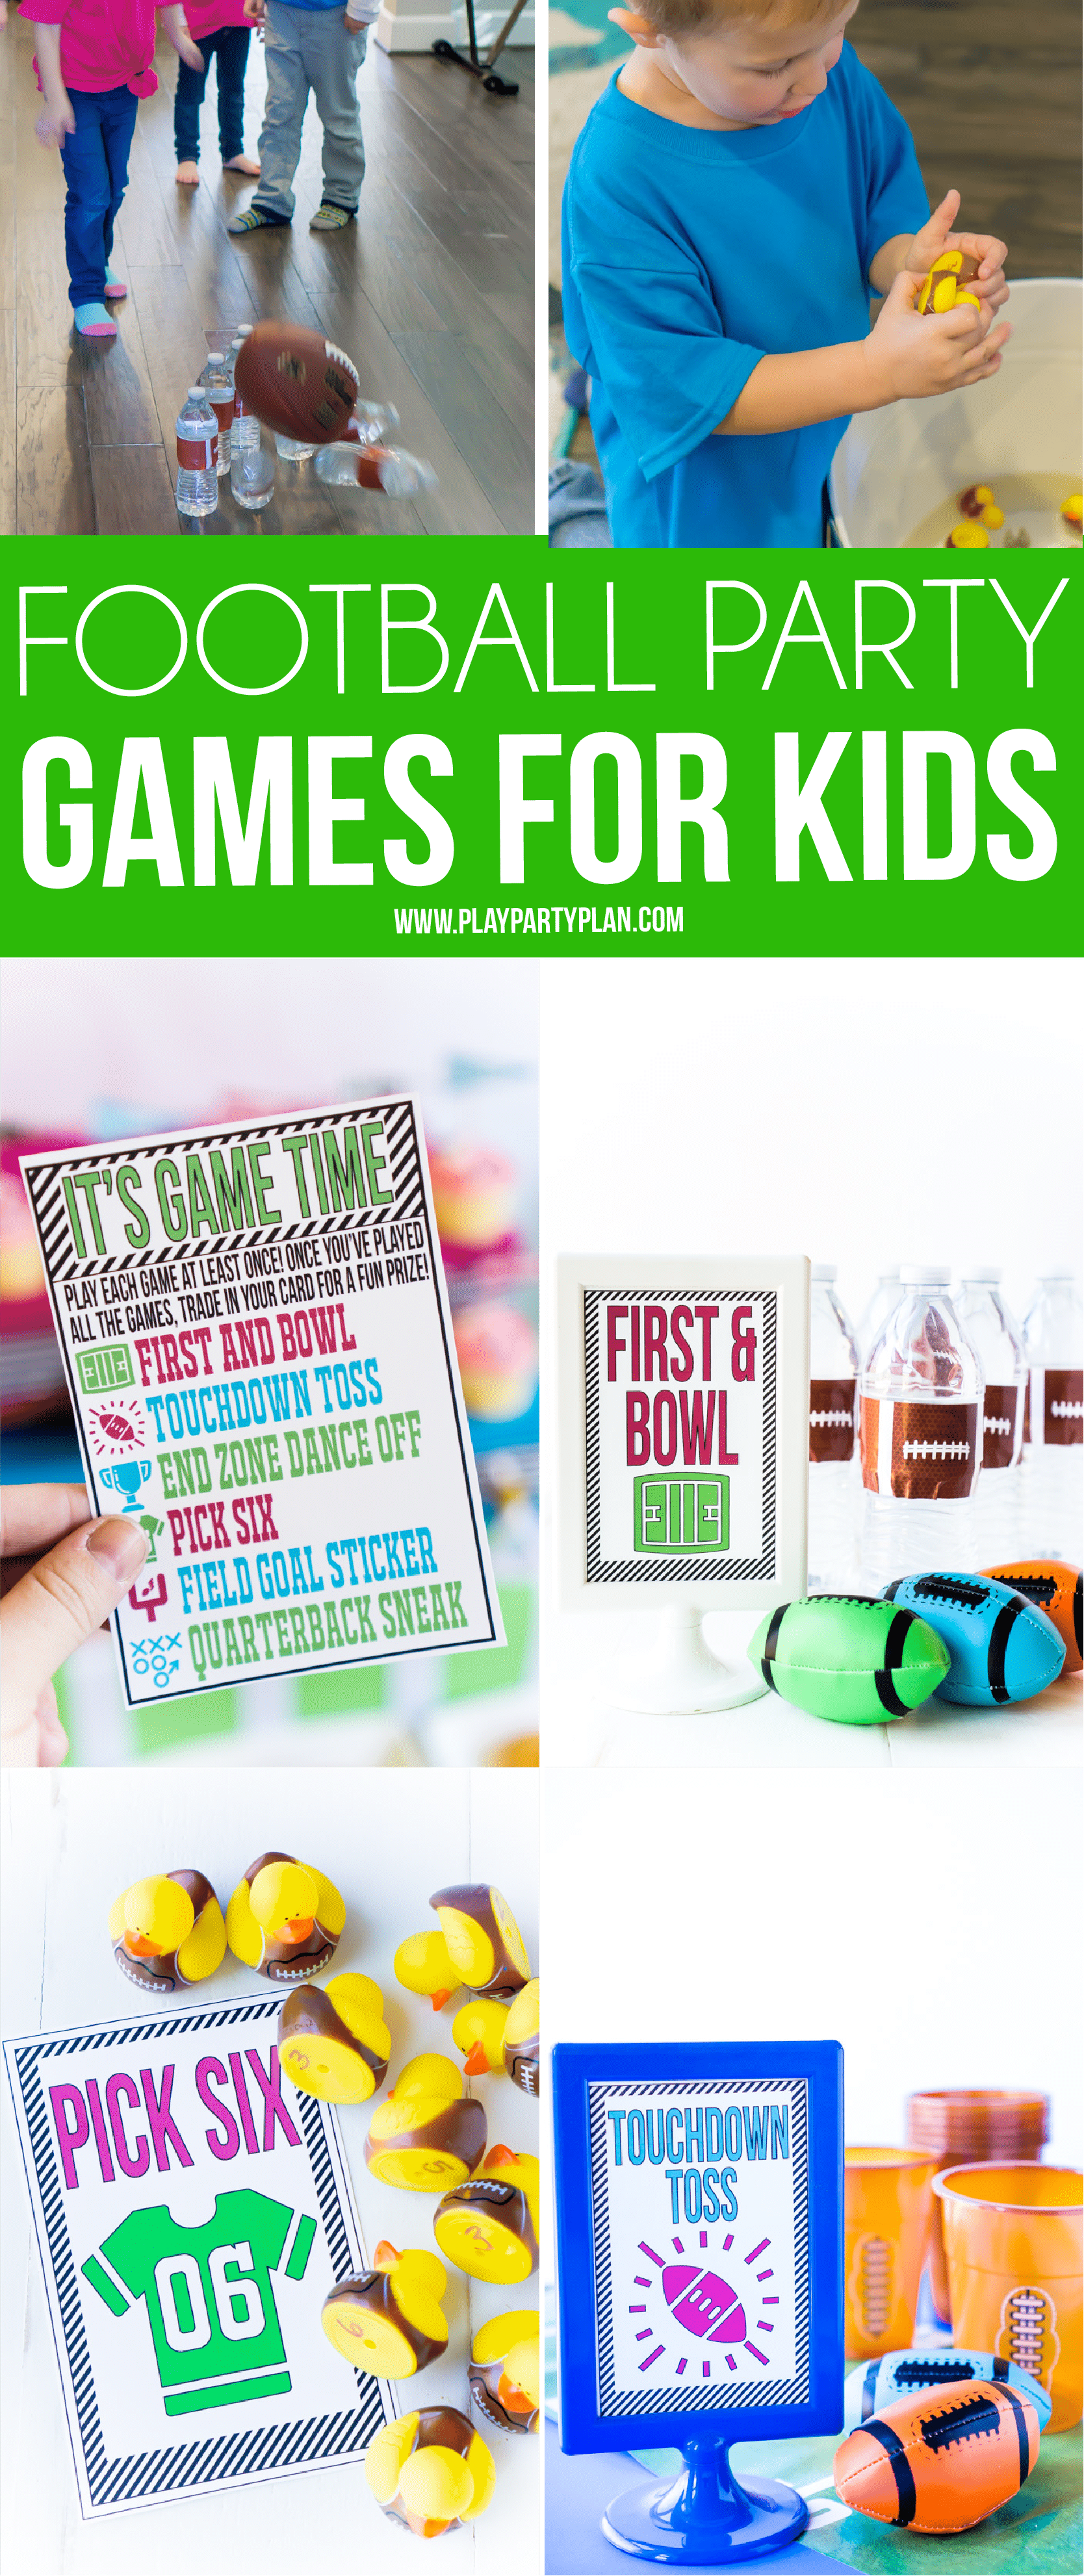 Football Party Games for Kids and Other Touchdown Worthy Party Ideas - 88